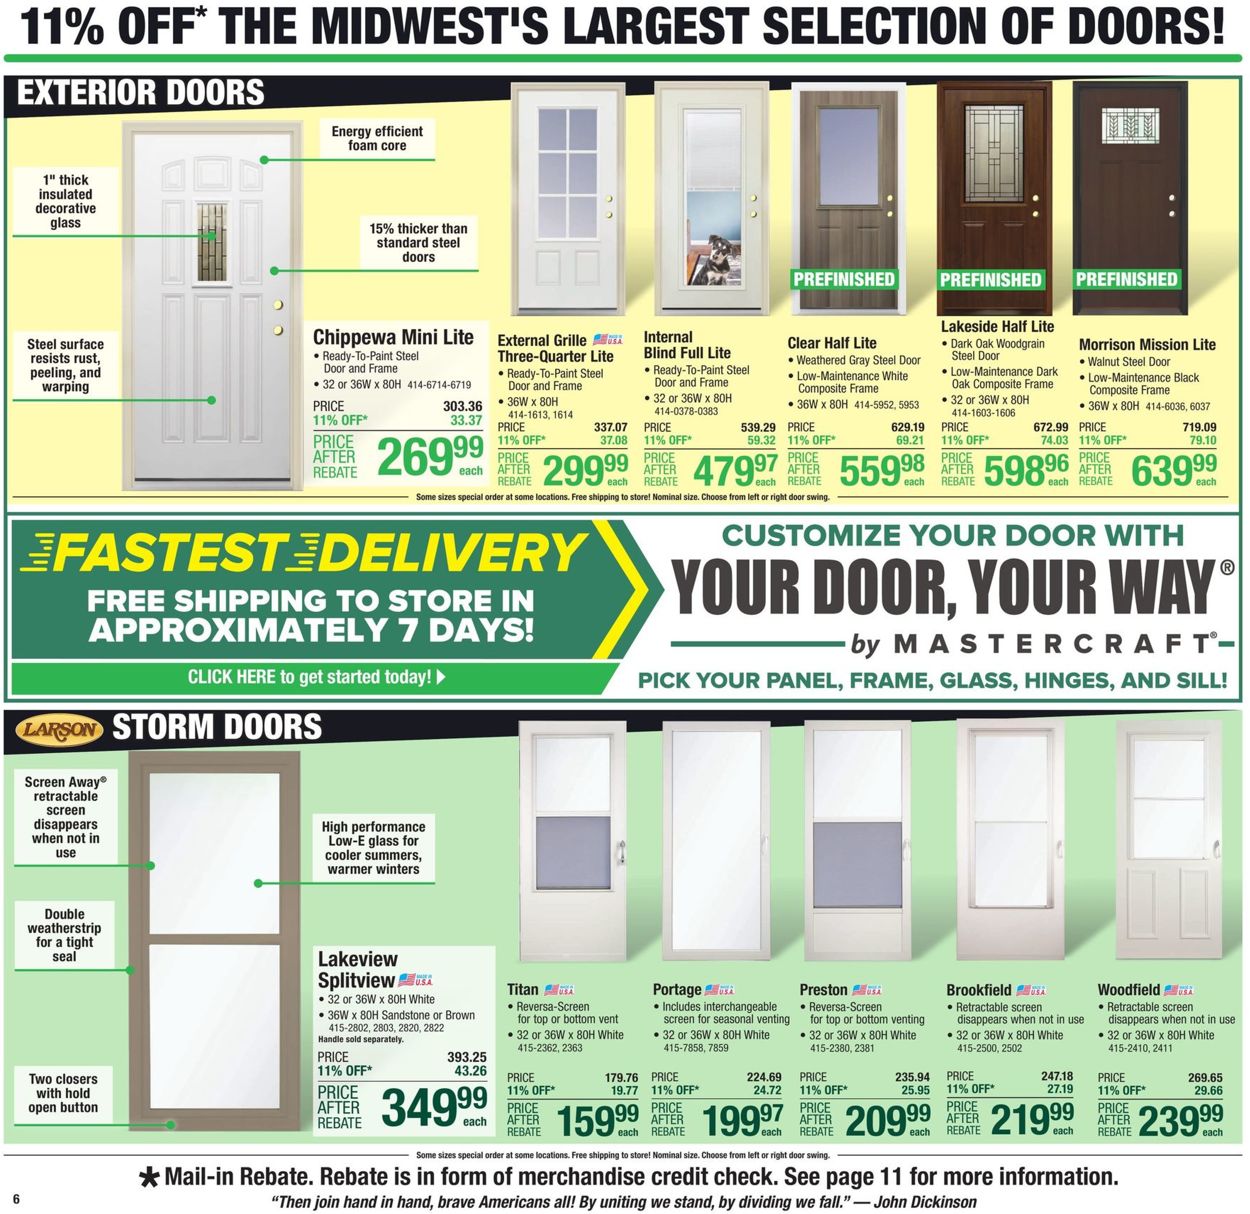 Catalogue Menards - 4th of July Sale from 06/30/2022